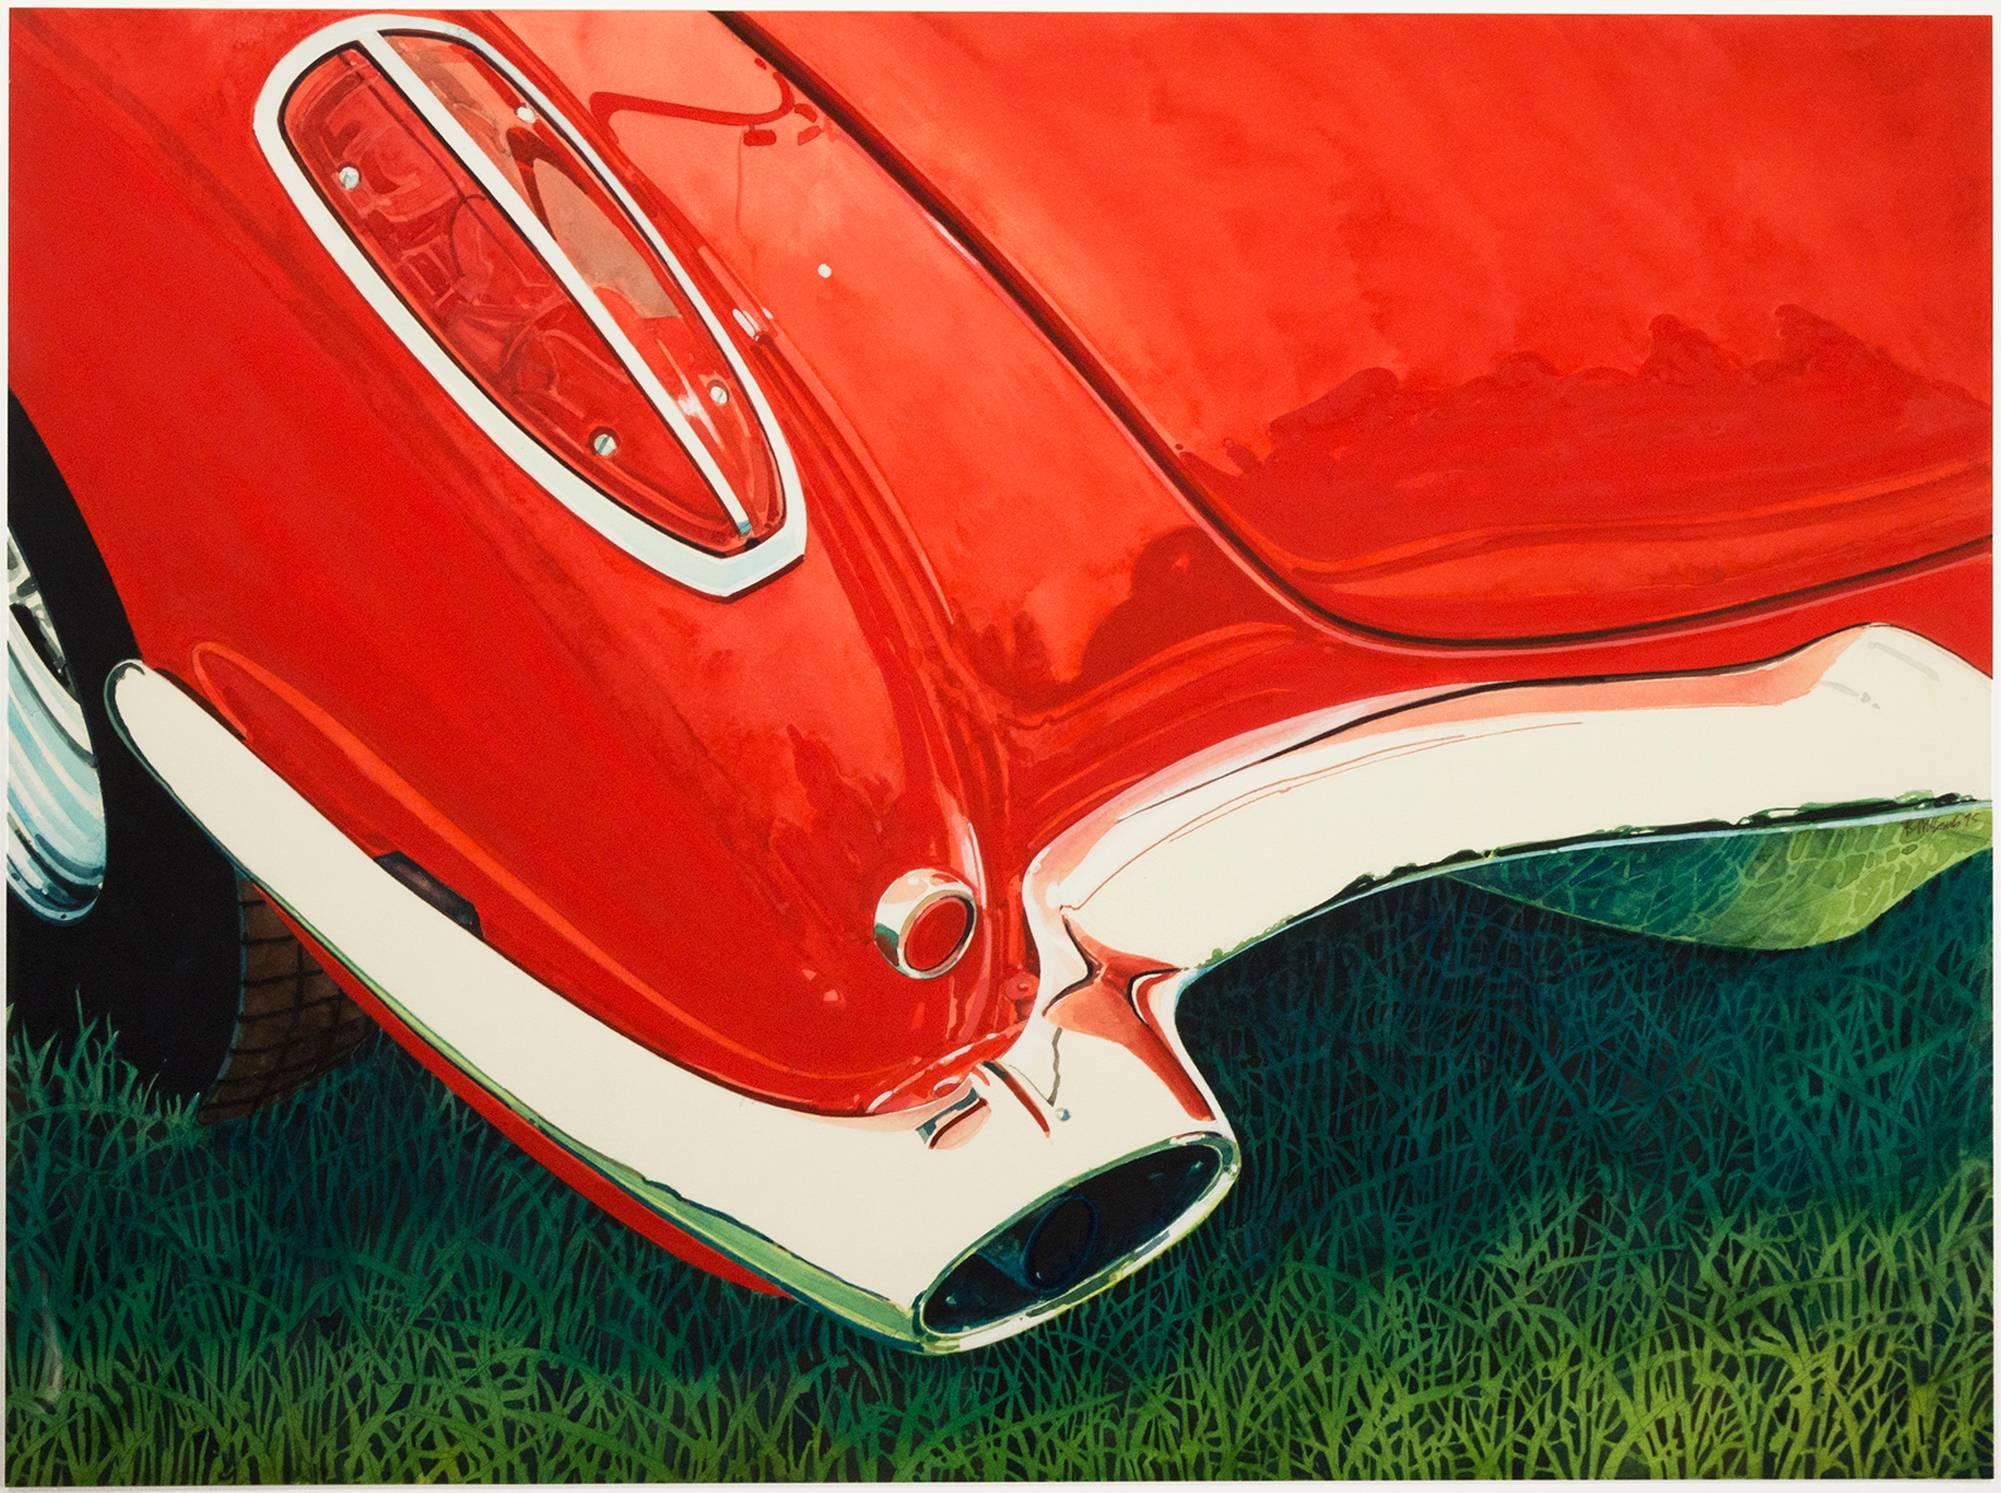 "'58 Corvette, " Watercolor Close up signed by Bruce McCombs